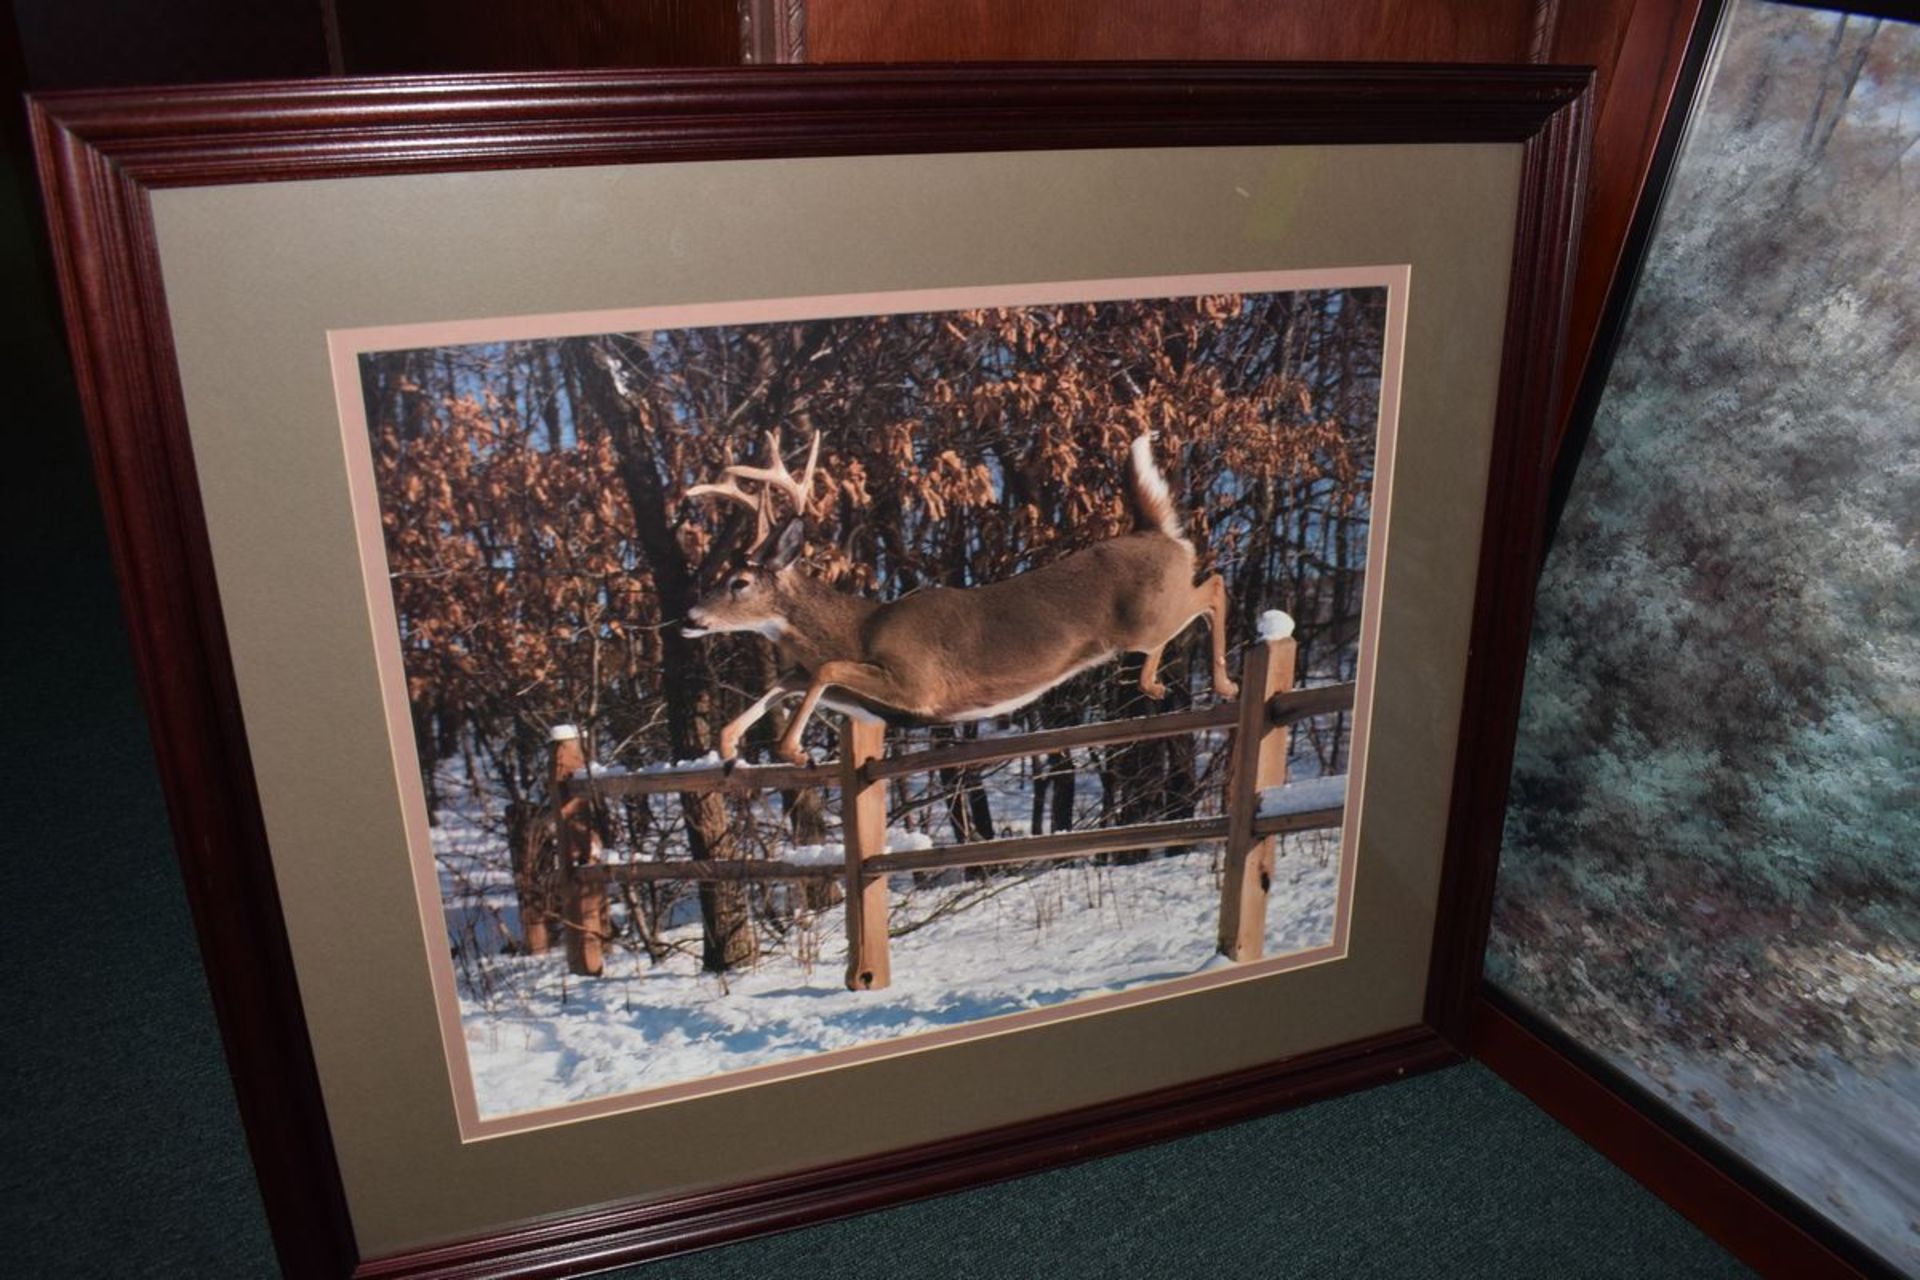 Framed Pictures - Image 3 of 4